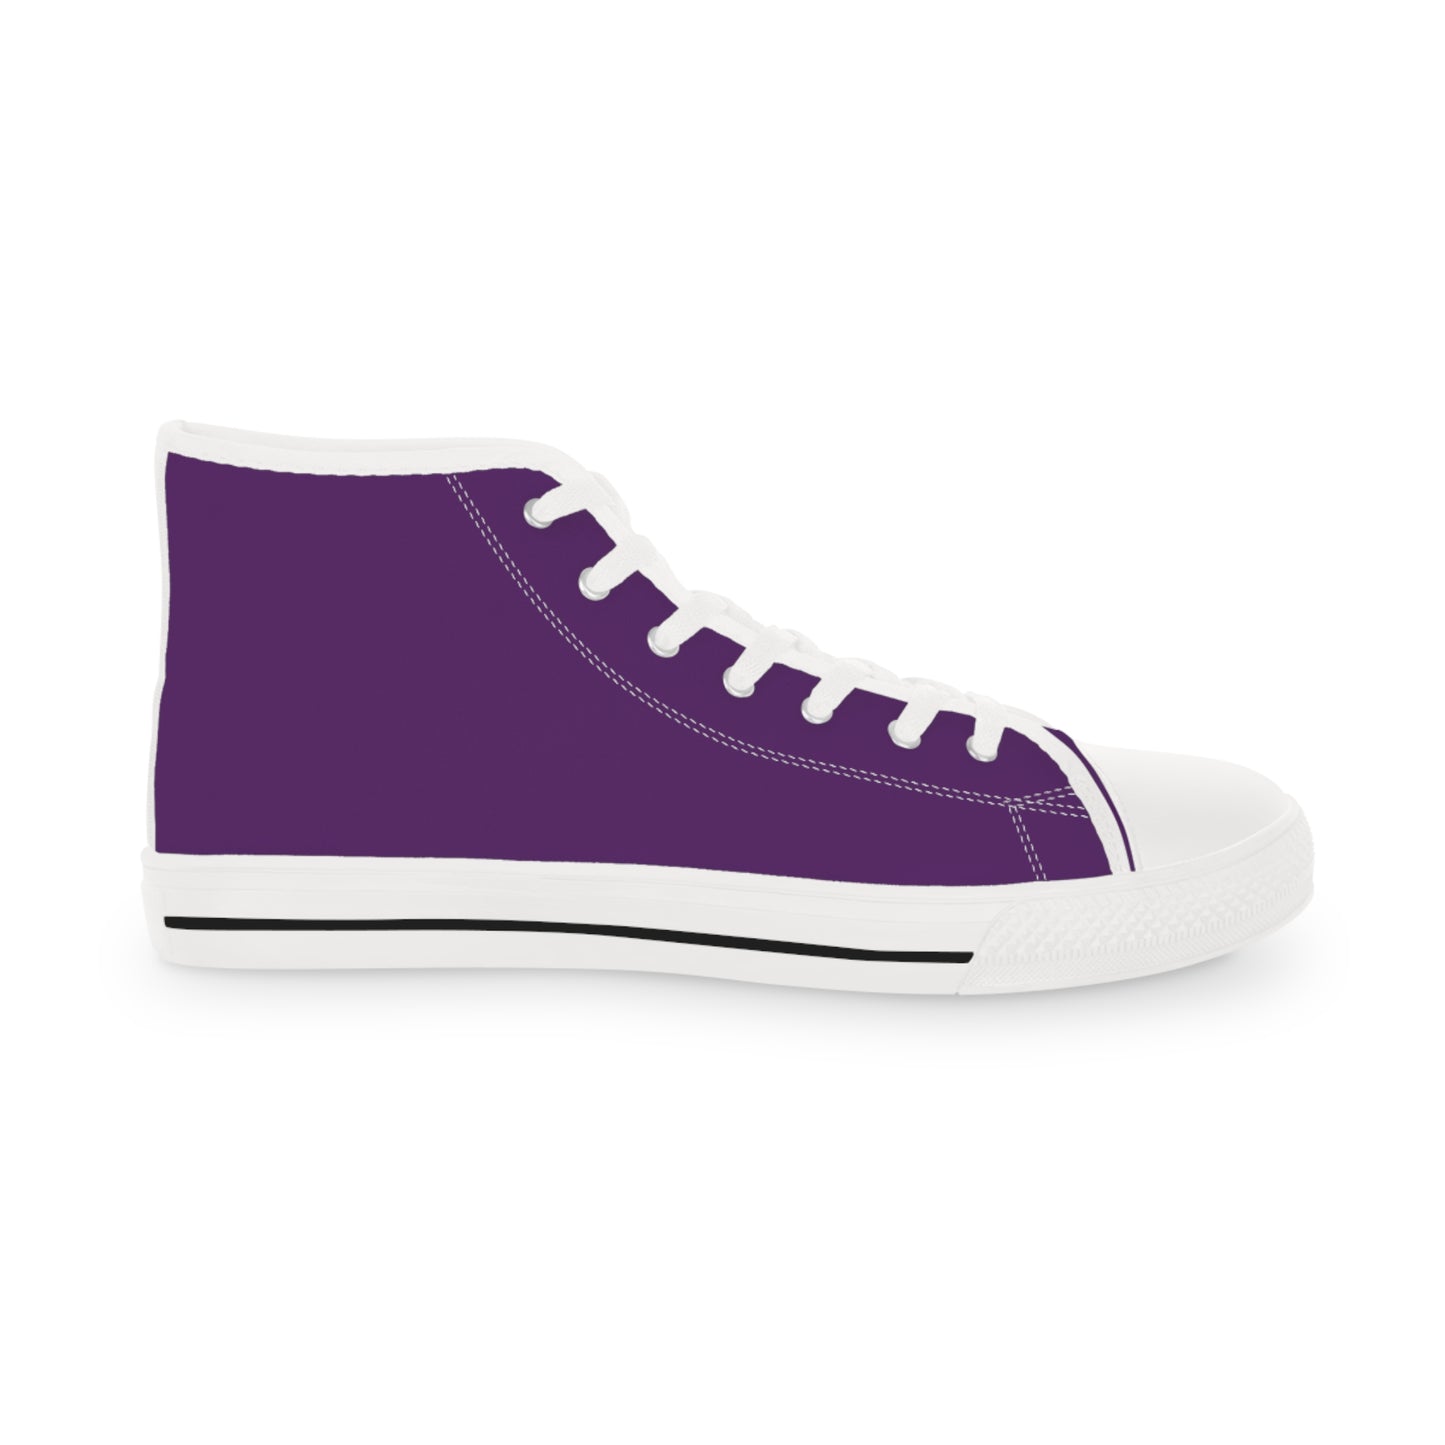 Men's Canvas High Top Solid Color Sneakers - Royal Purple US 14 White sole